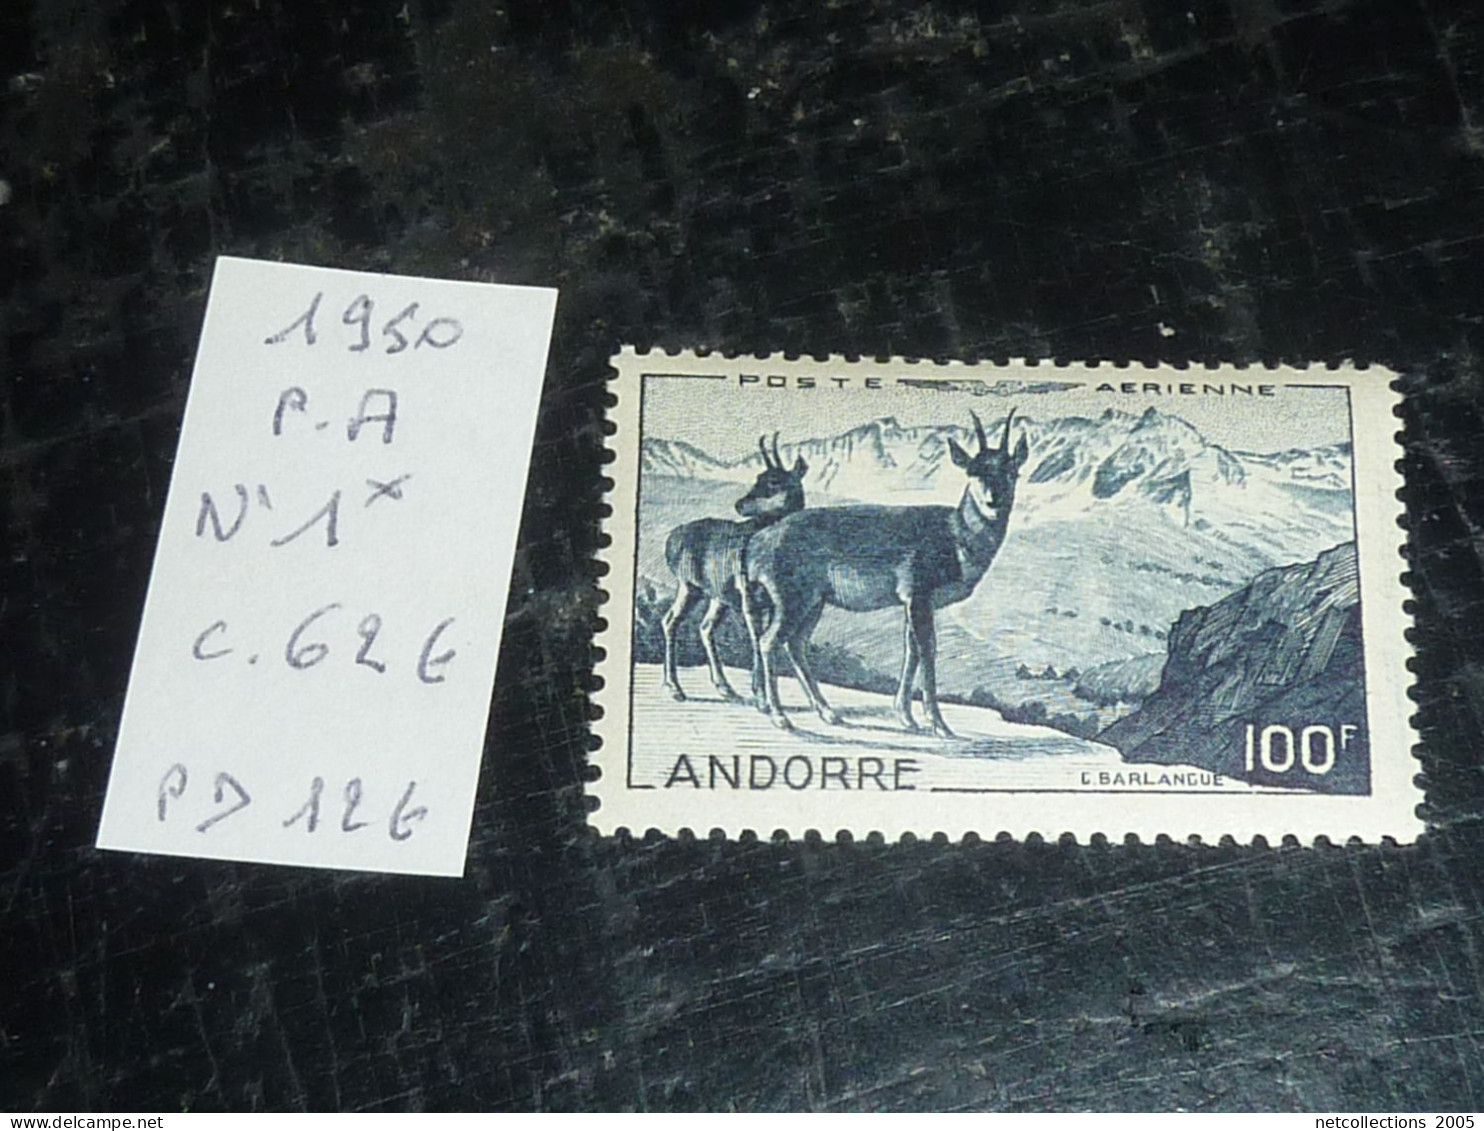 ANDORRE TIMBRE POSTE AERIENNE 1950 N°1 - NEUFS AVEC CHARNIERES (20/09) - Luftpost